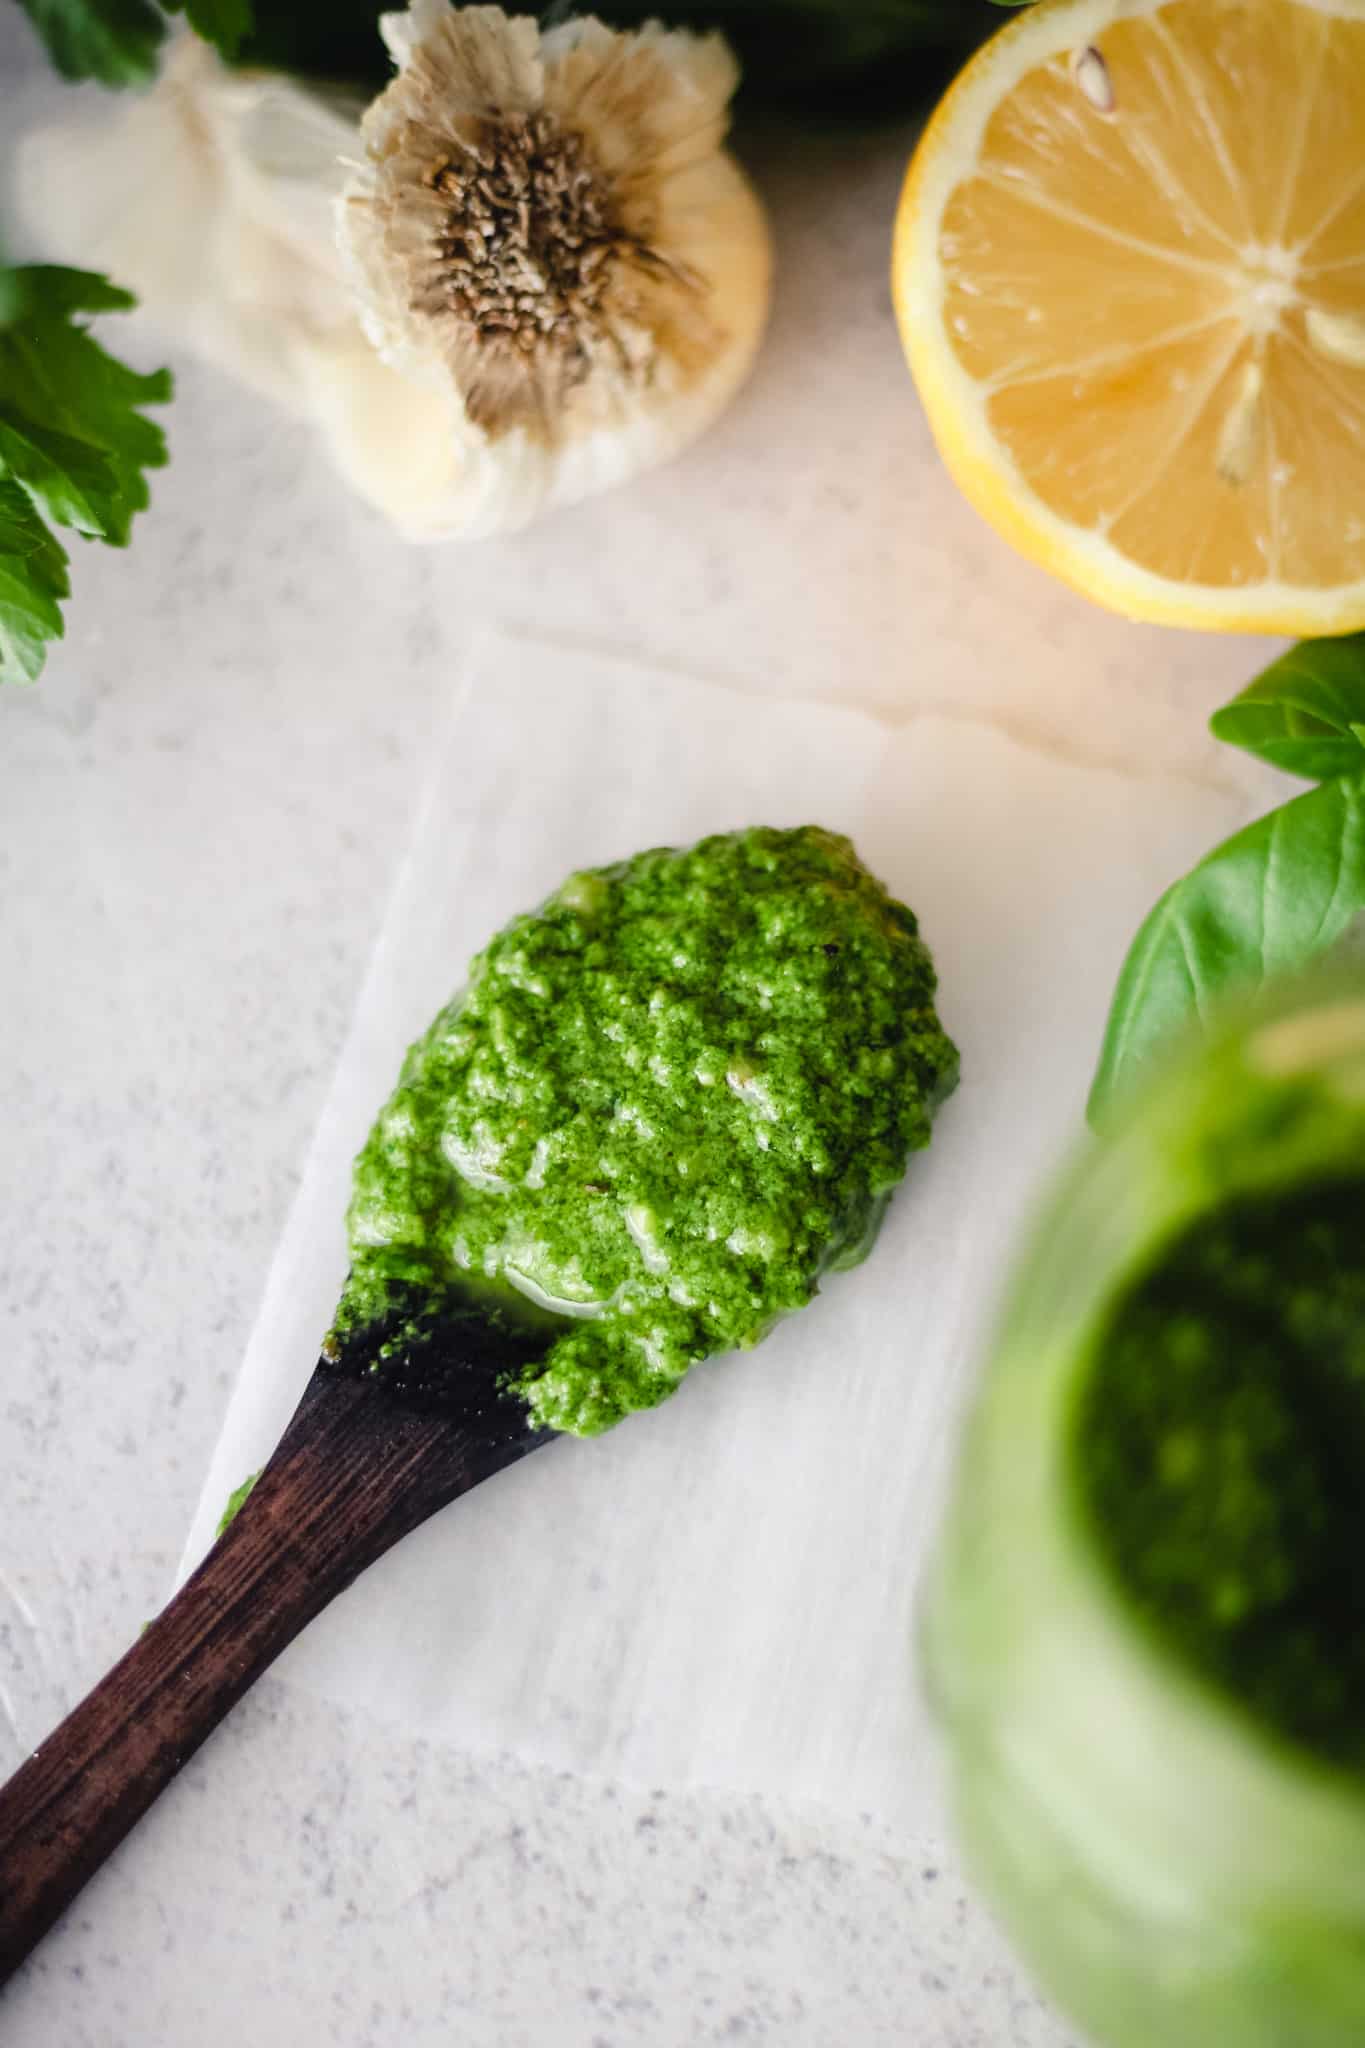 Pesto in a wooden spoon next to lemon, garlic, and basil.